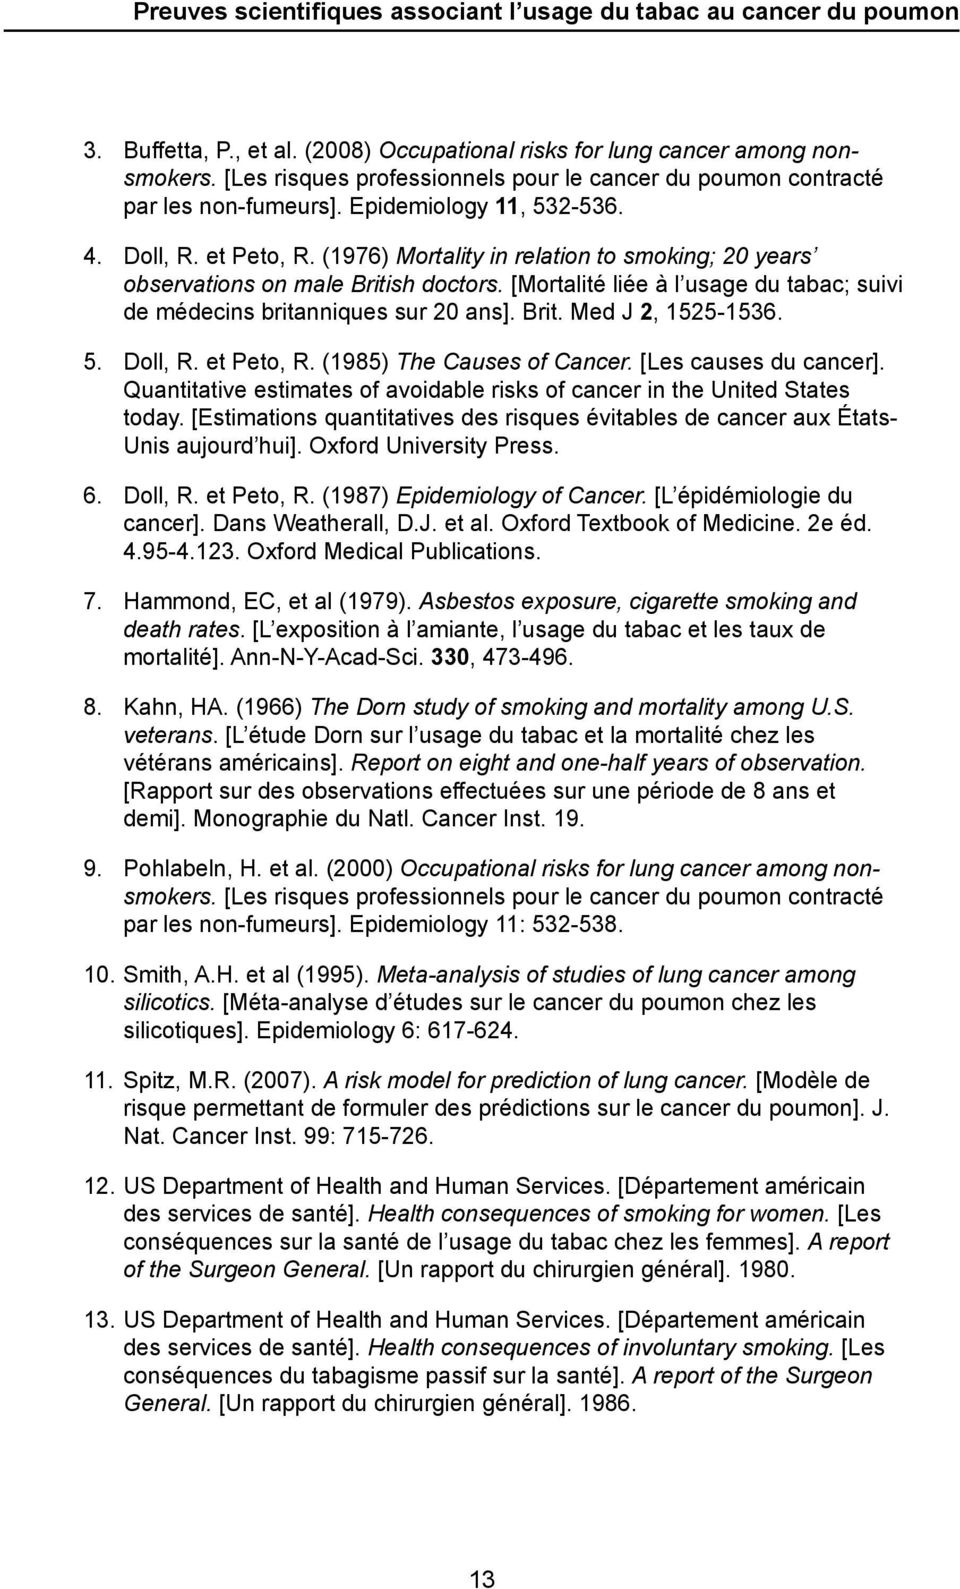 5. Doll, R. et Peto, R. (1985) The Causes of Cancer. [Les causes du cancer]. Quantitative estimates of avoidable risks of cancer in the United States today.